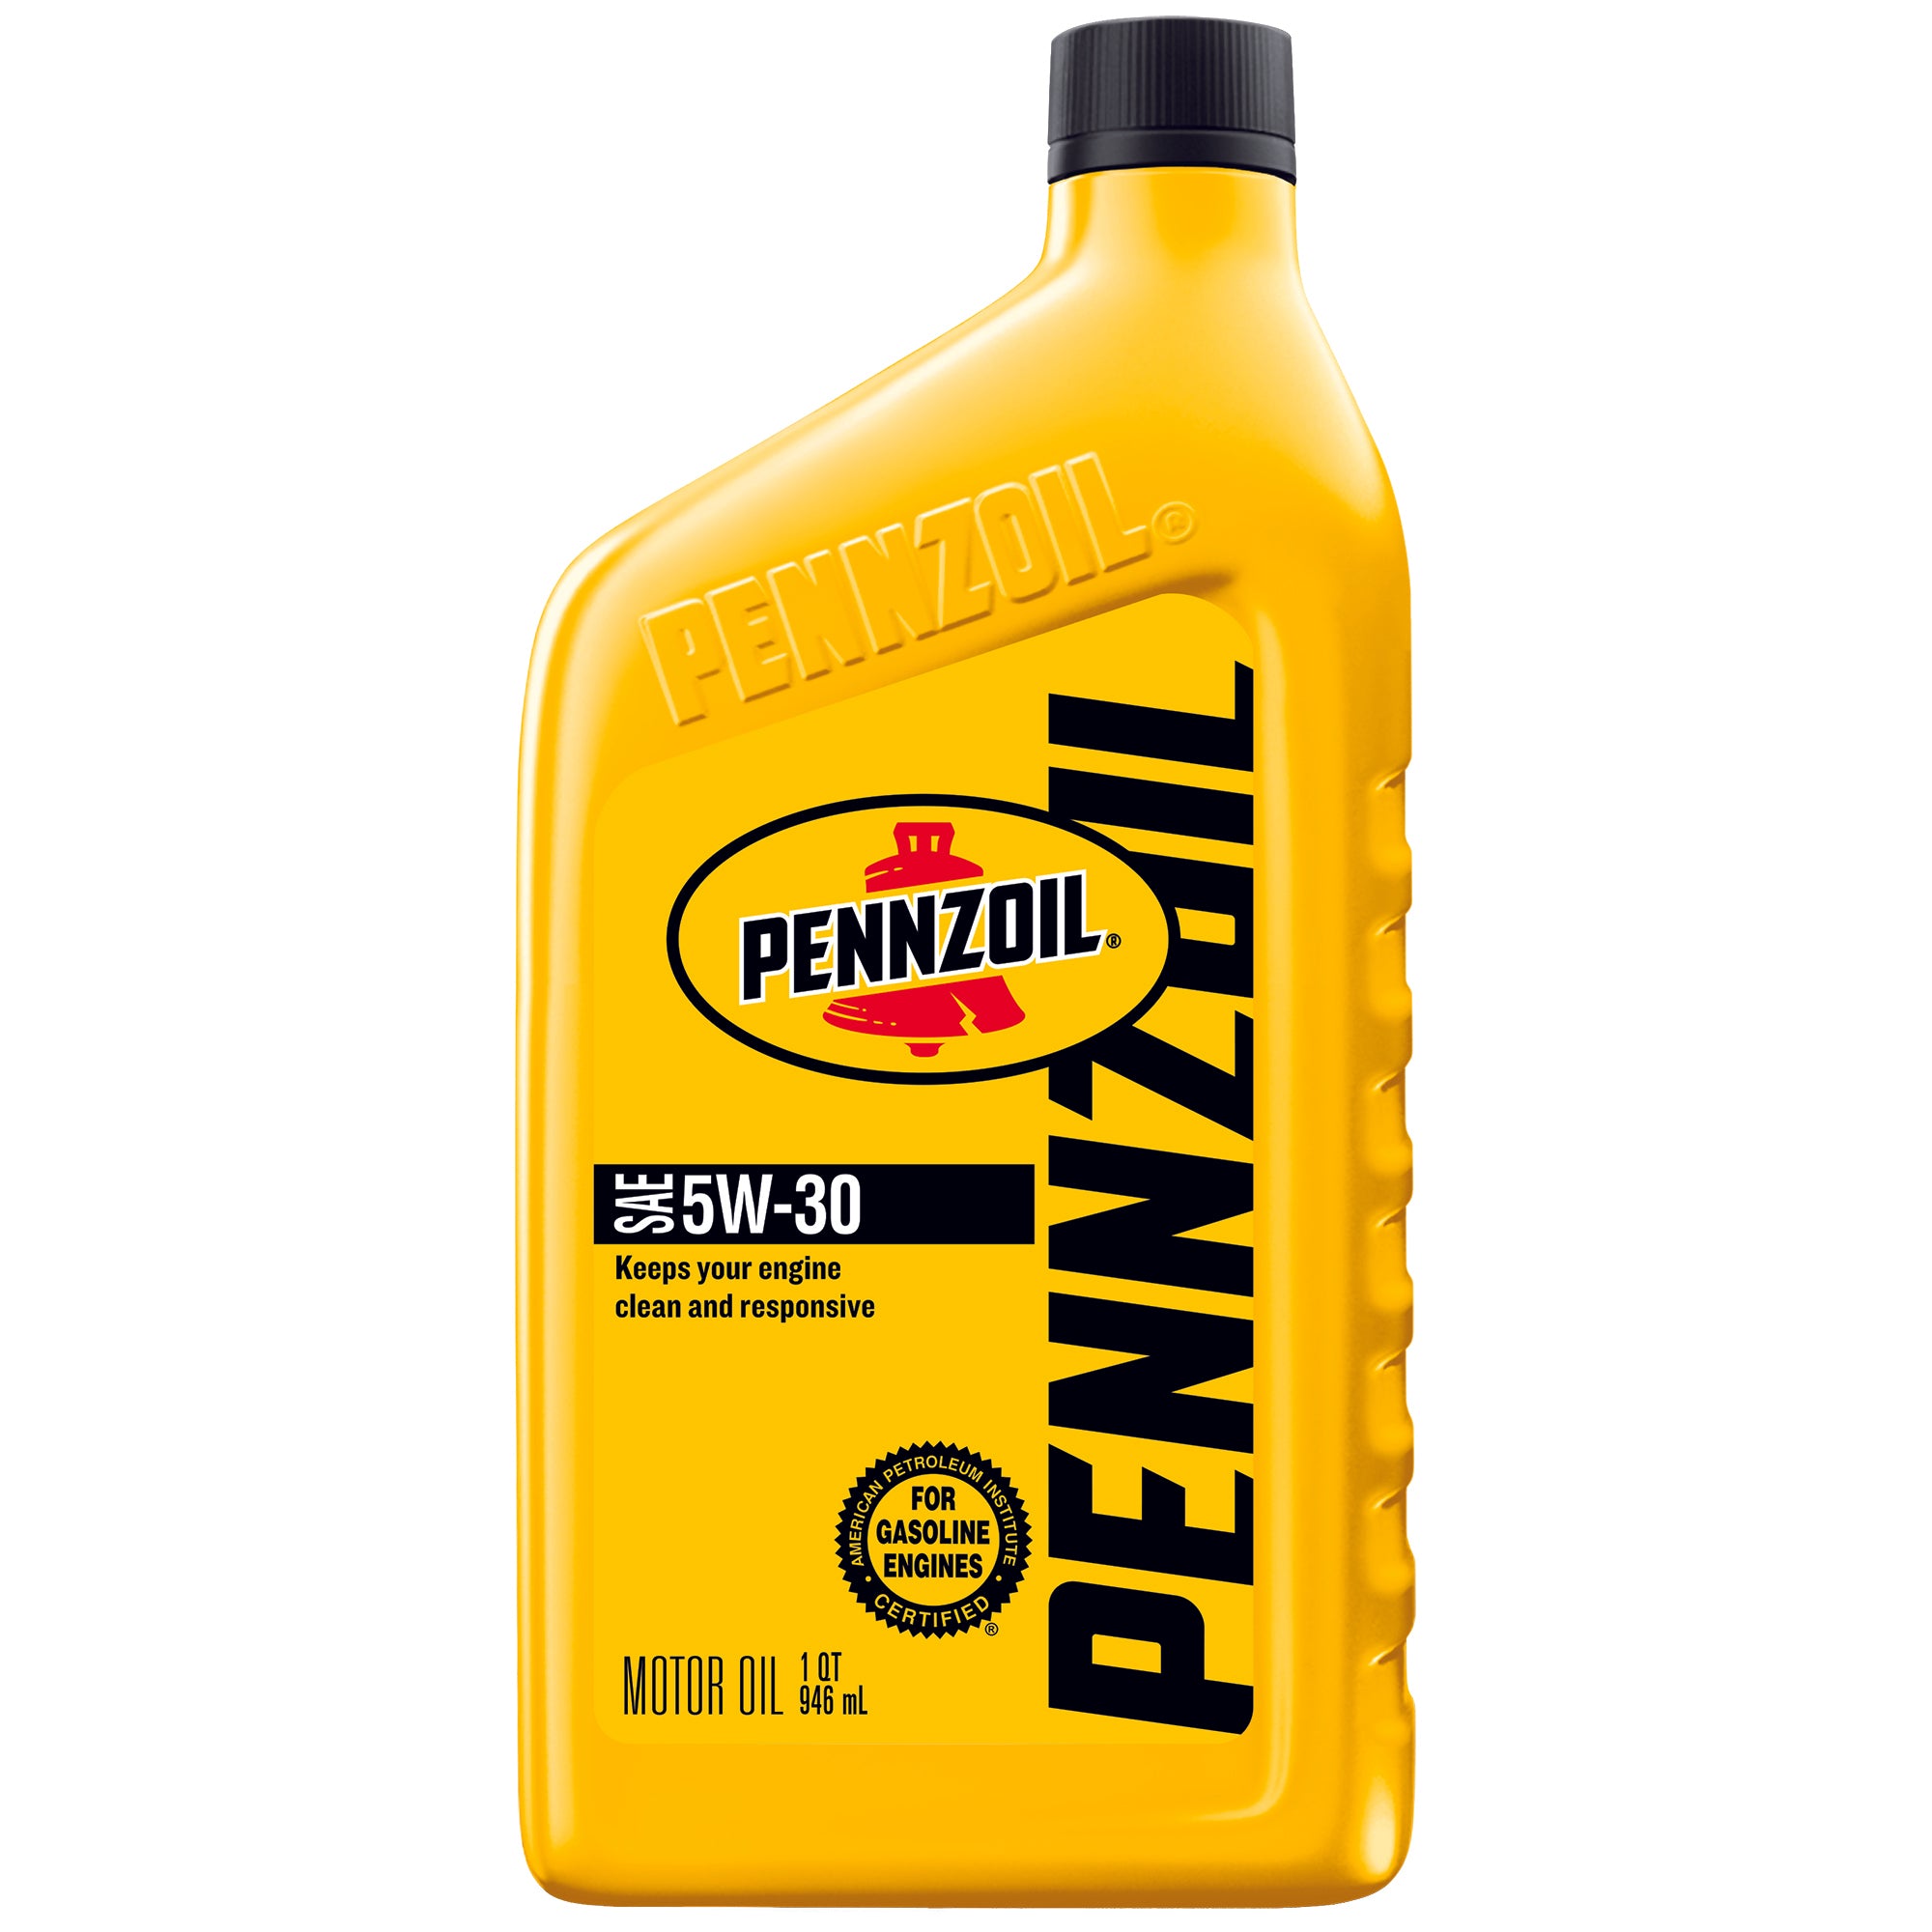 Pennzoil Conventional 5W 30 Motor Oil Case of 12 1 qt